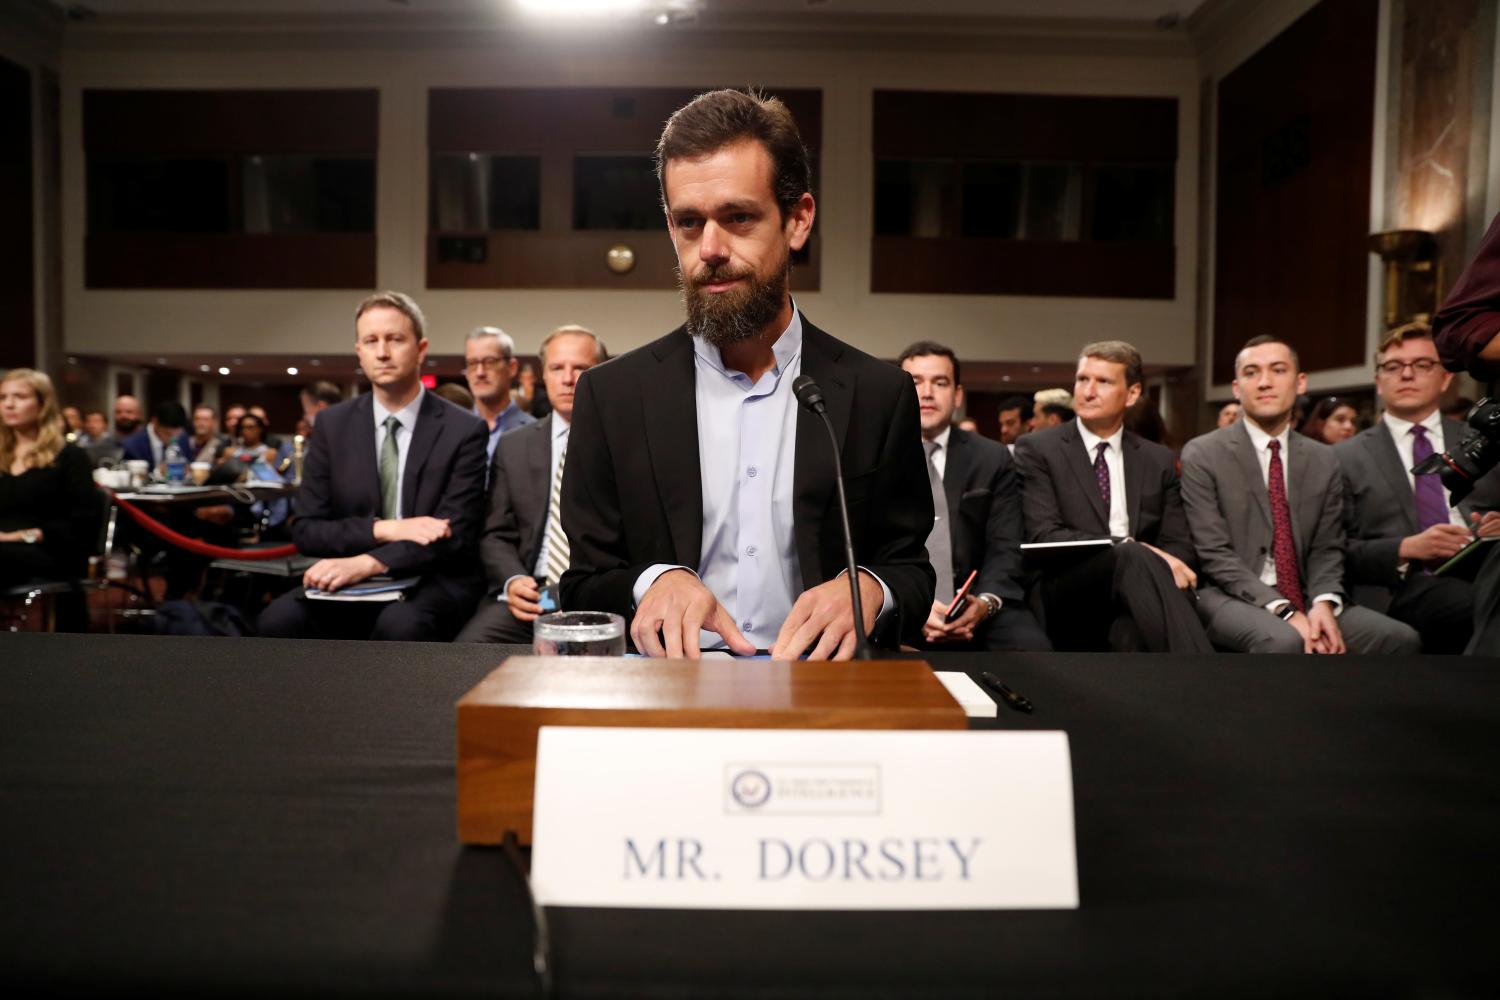 Twitter CEO Jack Dorsey is seated prior to testifying before a Senate Intelligence Committee hearing on foreign influence operations on social media platforms on Capitol Hill in Washington, U.S., September 5, 2018. REUTERS/Joshua Roberts - RC1F1C782B50